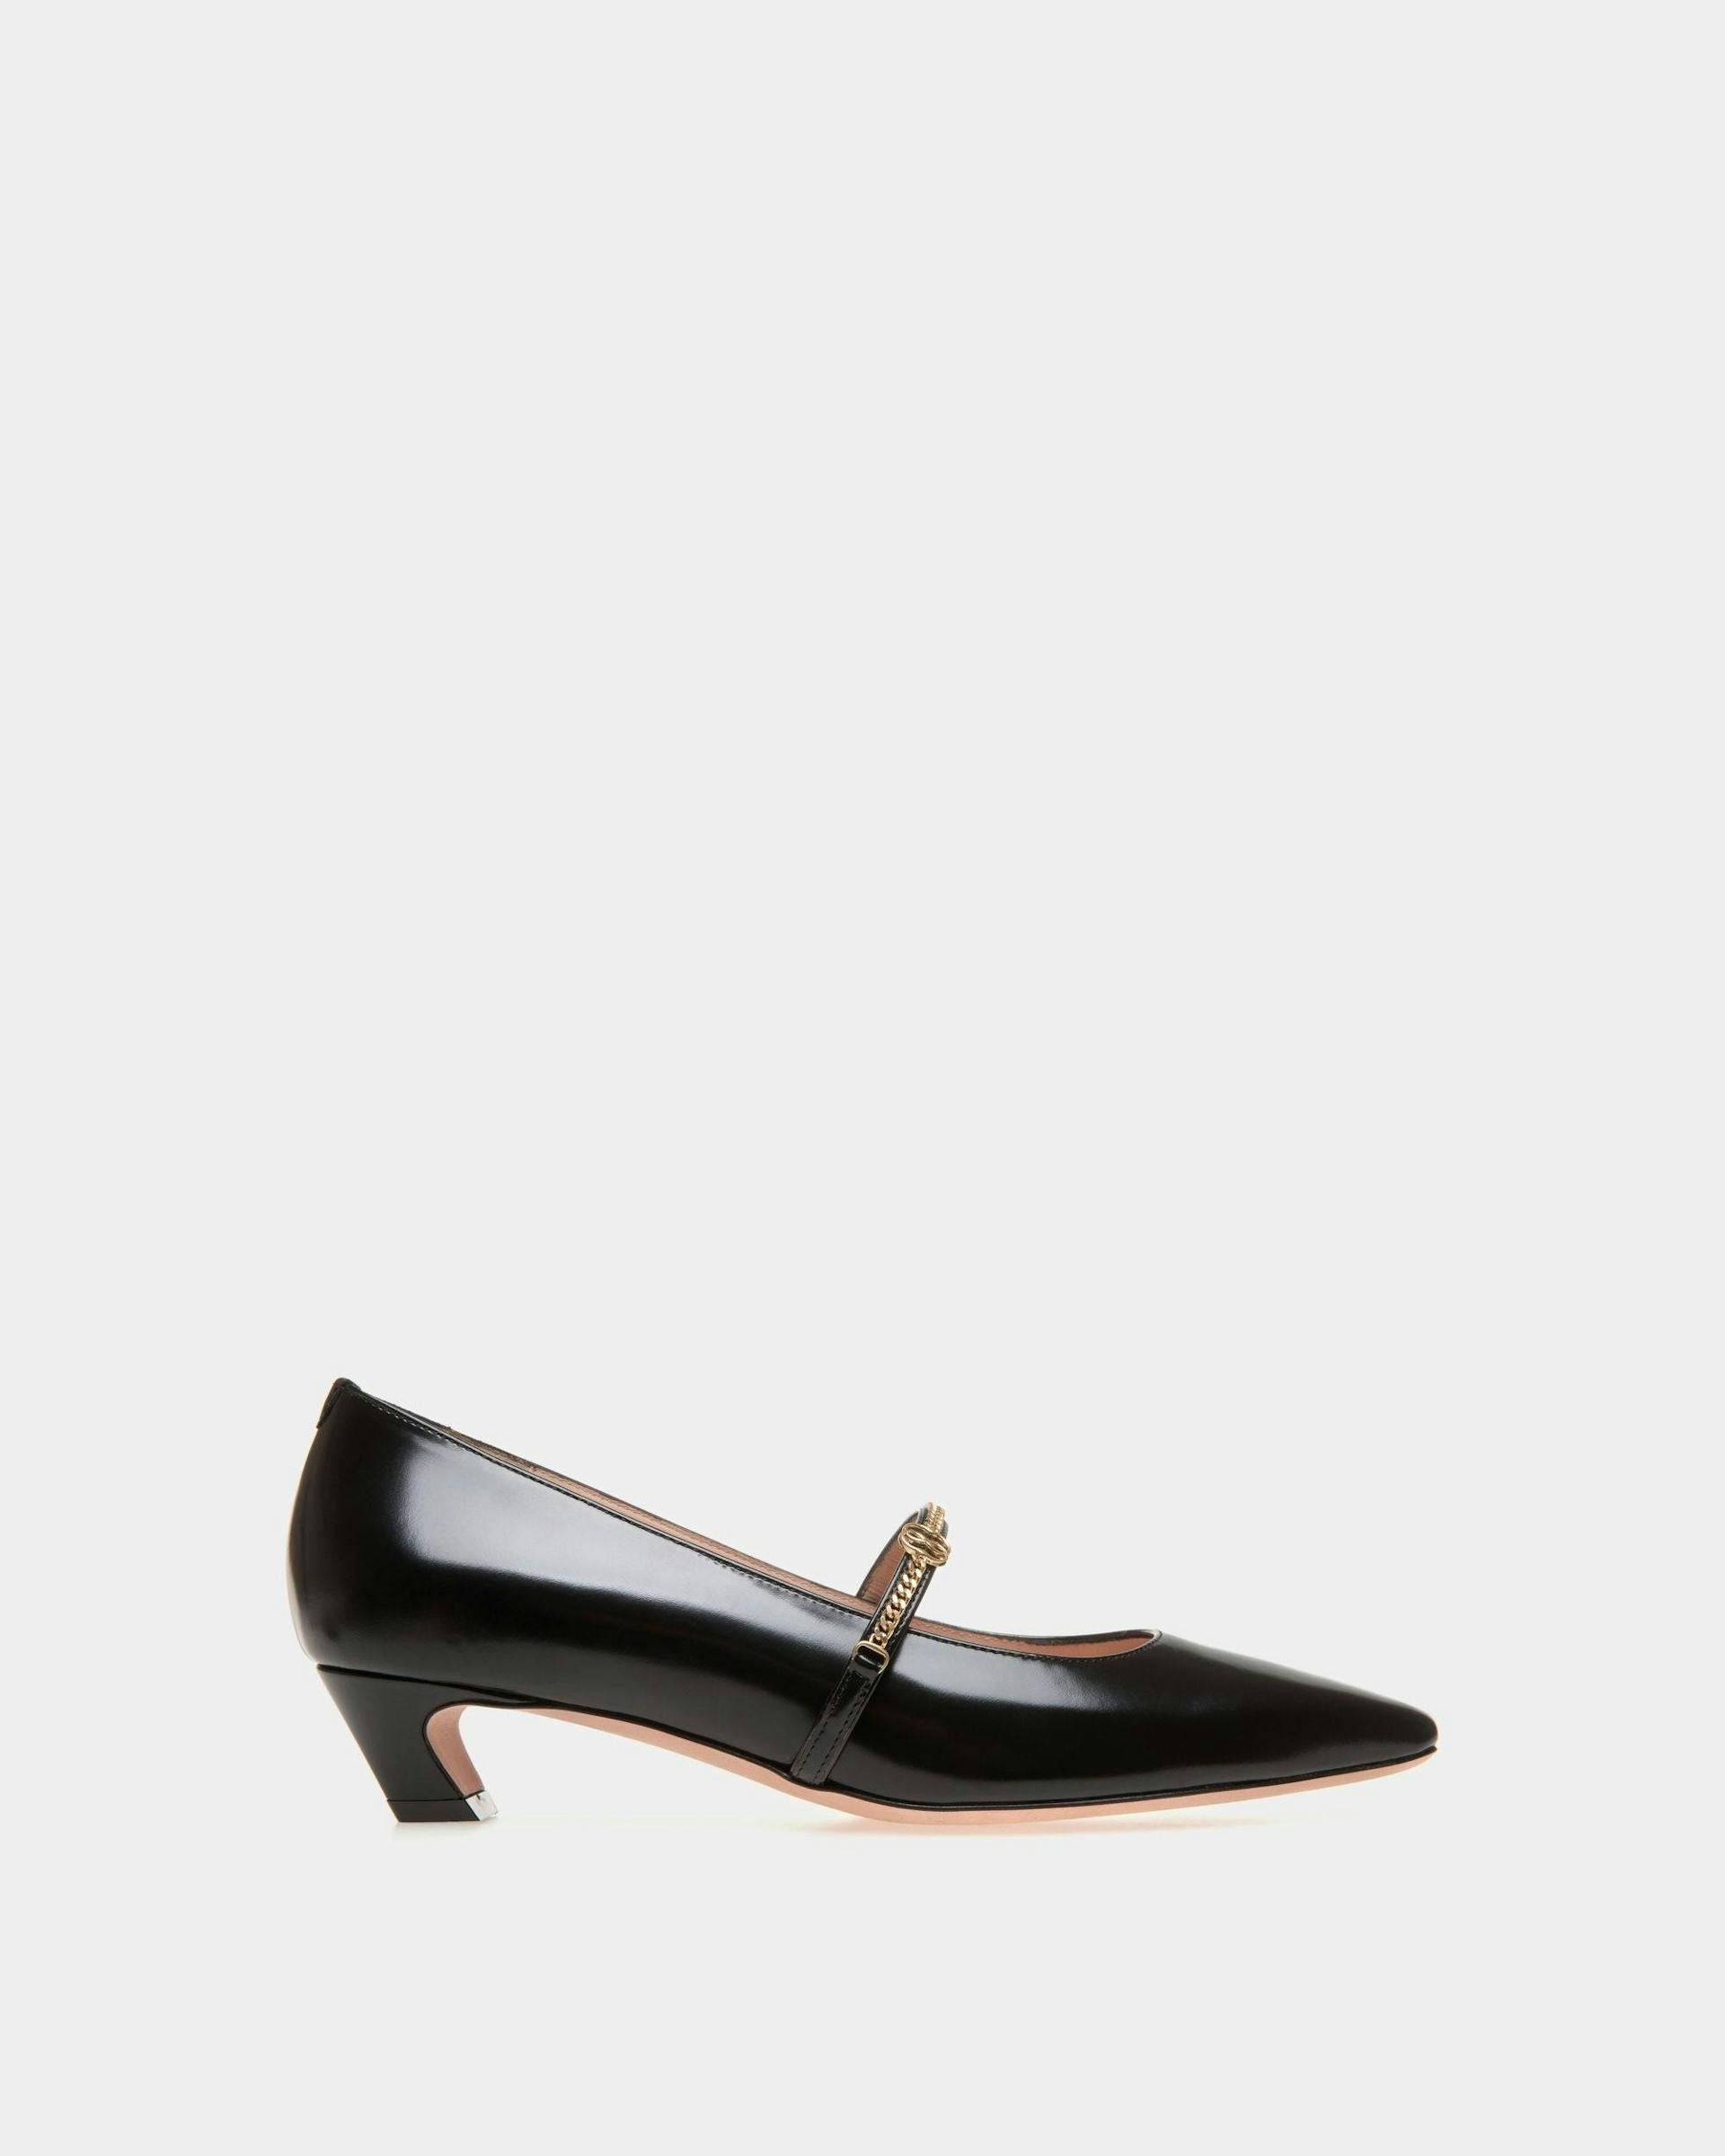 Women's Sylt Mary-Jane Pump In Black Leather | Bally | Still Life Side